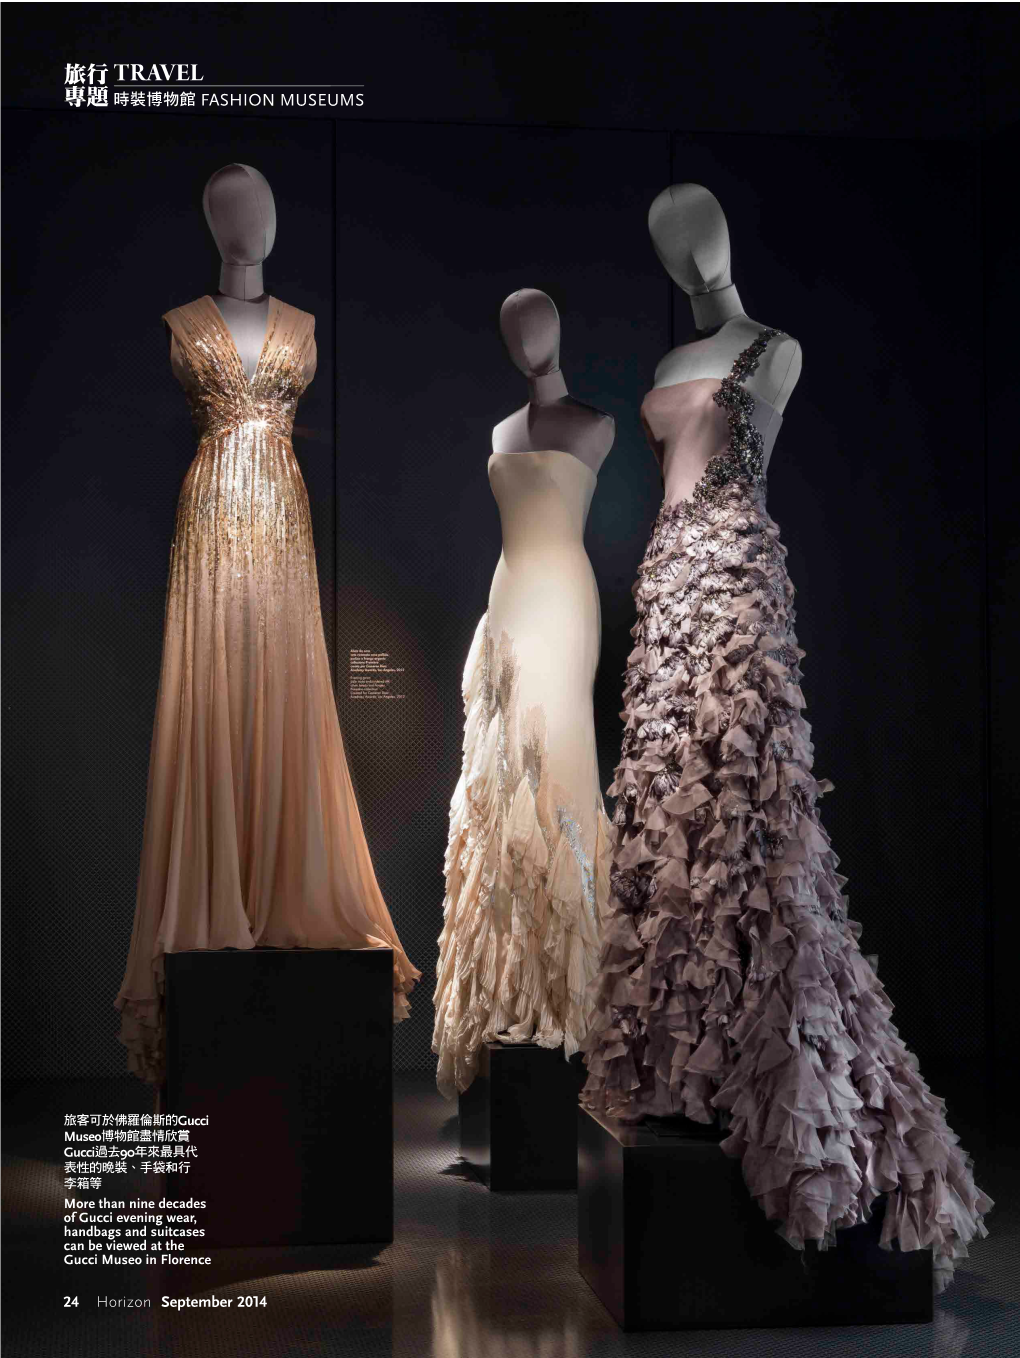 Travel �� ����� Fashion Museums